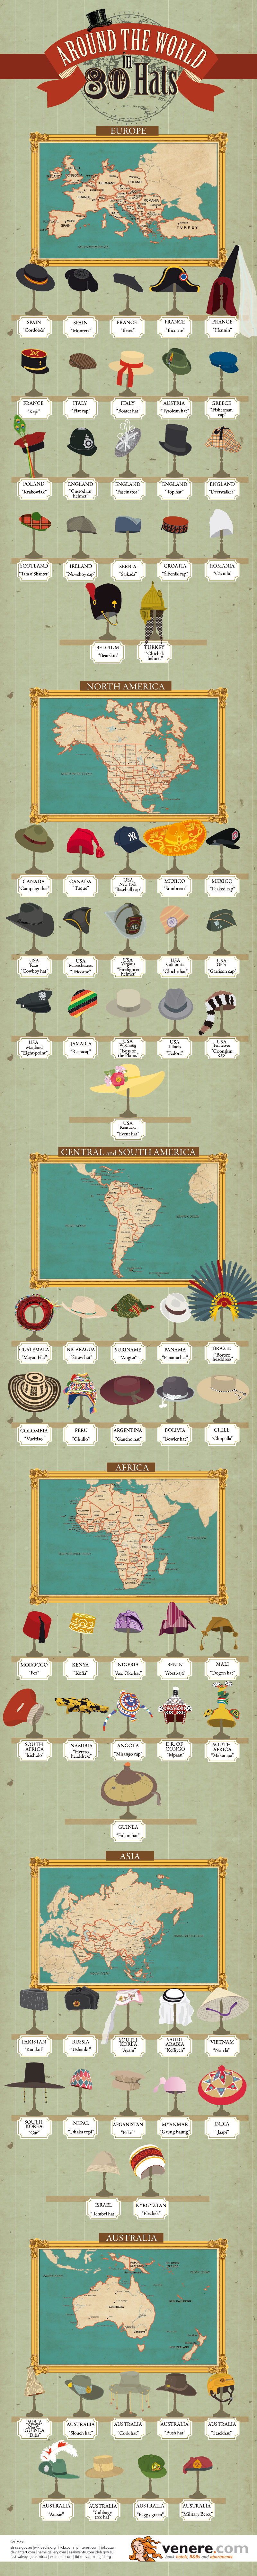 Around the World in 80 Hats infographic